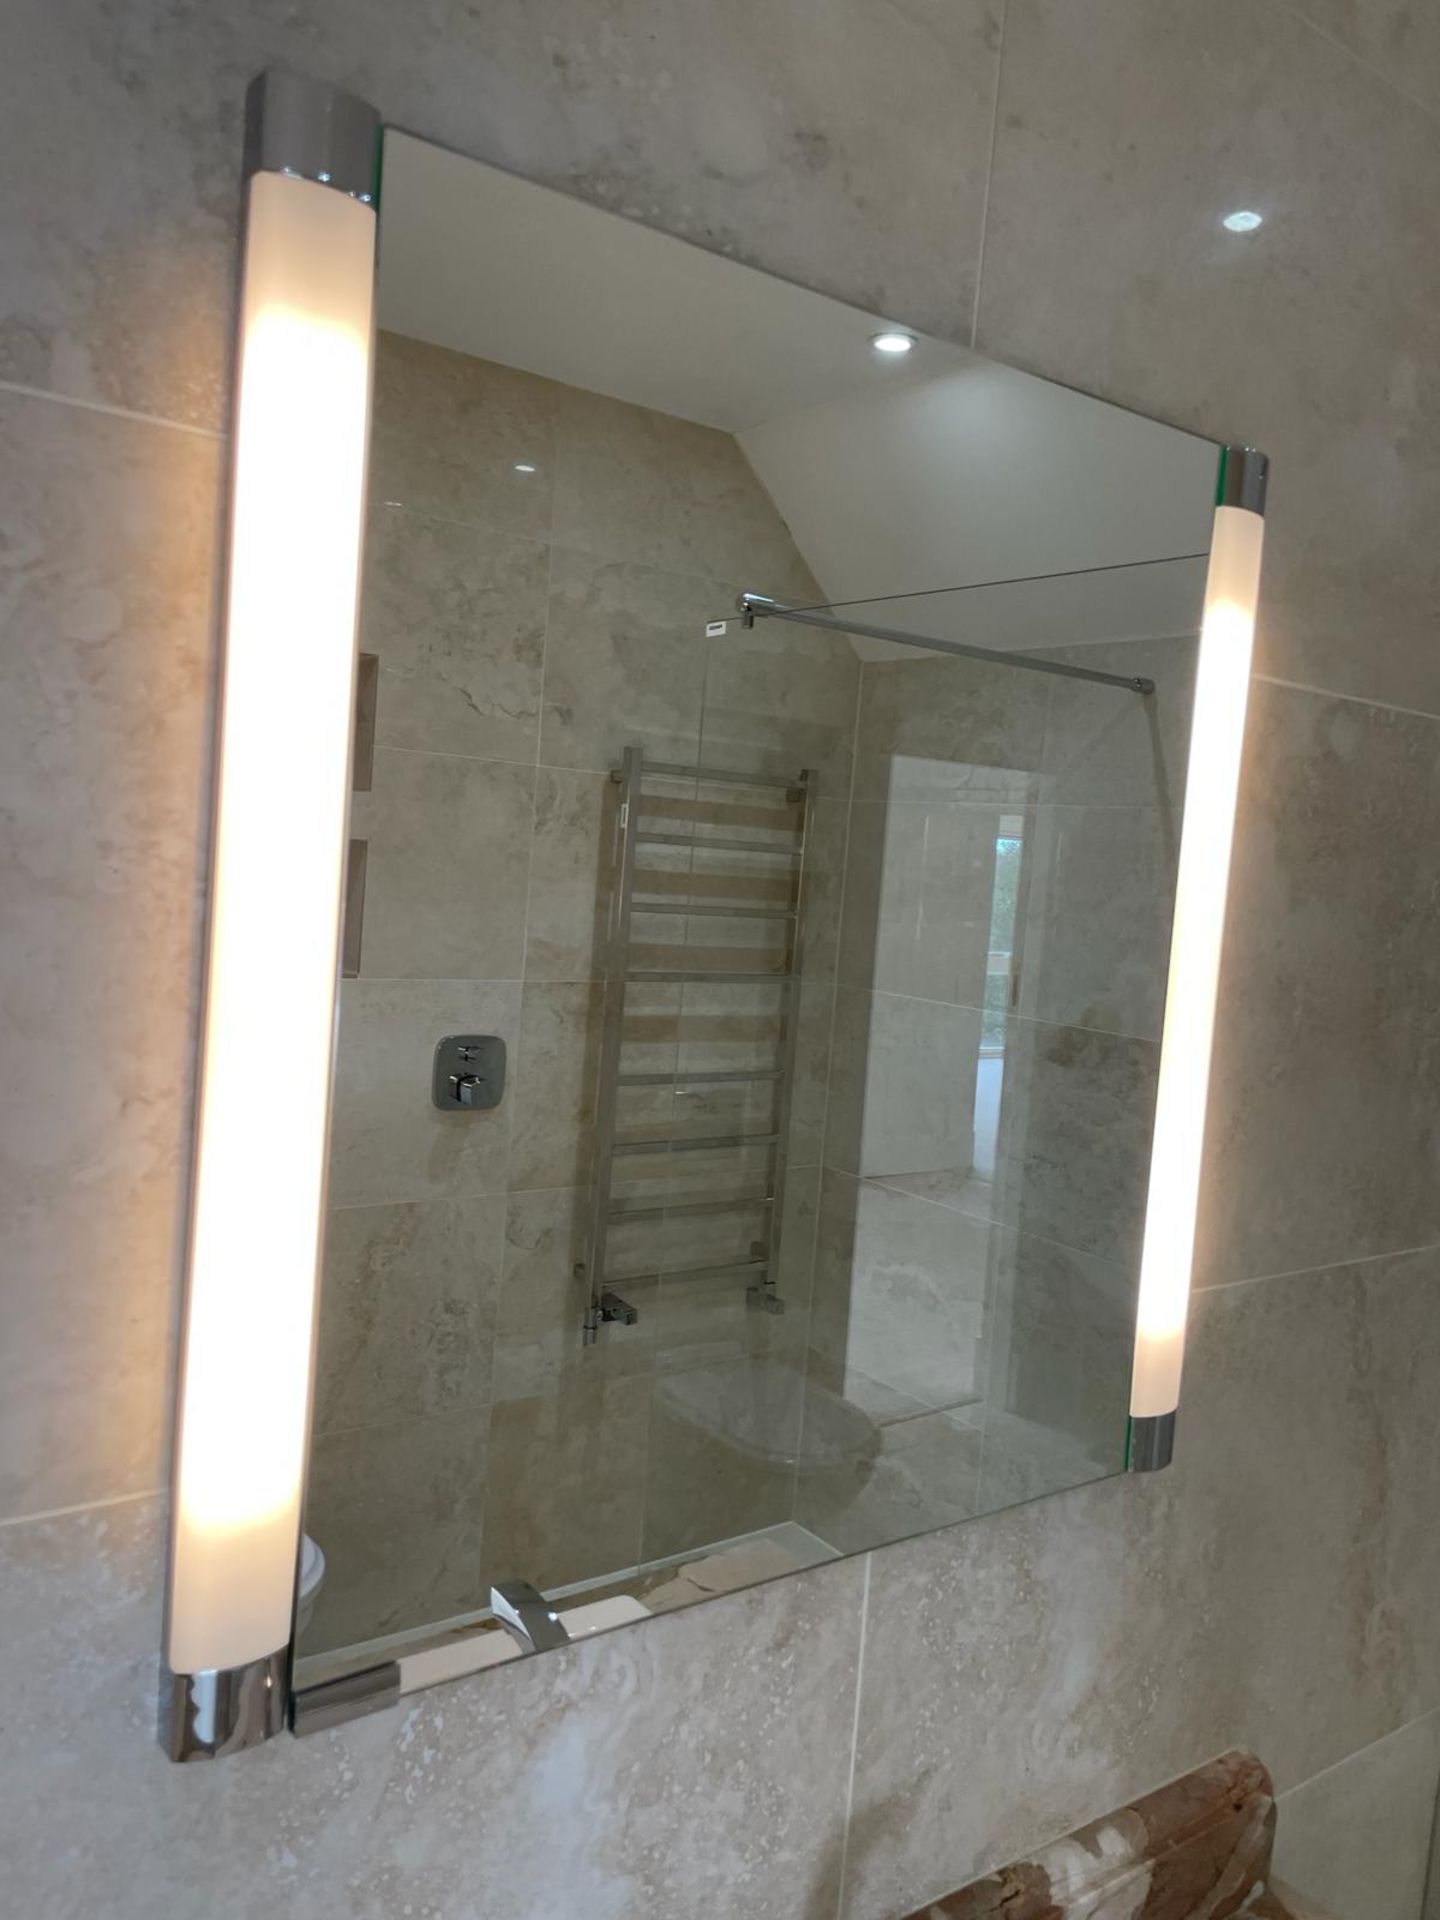 2 x KEUCO Illuminated Mirrored Wall Mounted Cabinets - Total Original Value: £2,000 - Ref: - Image 11 of 19